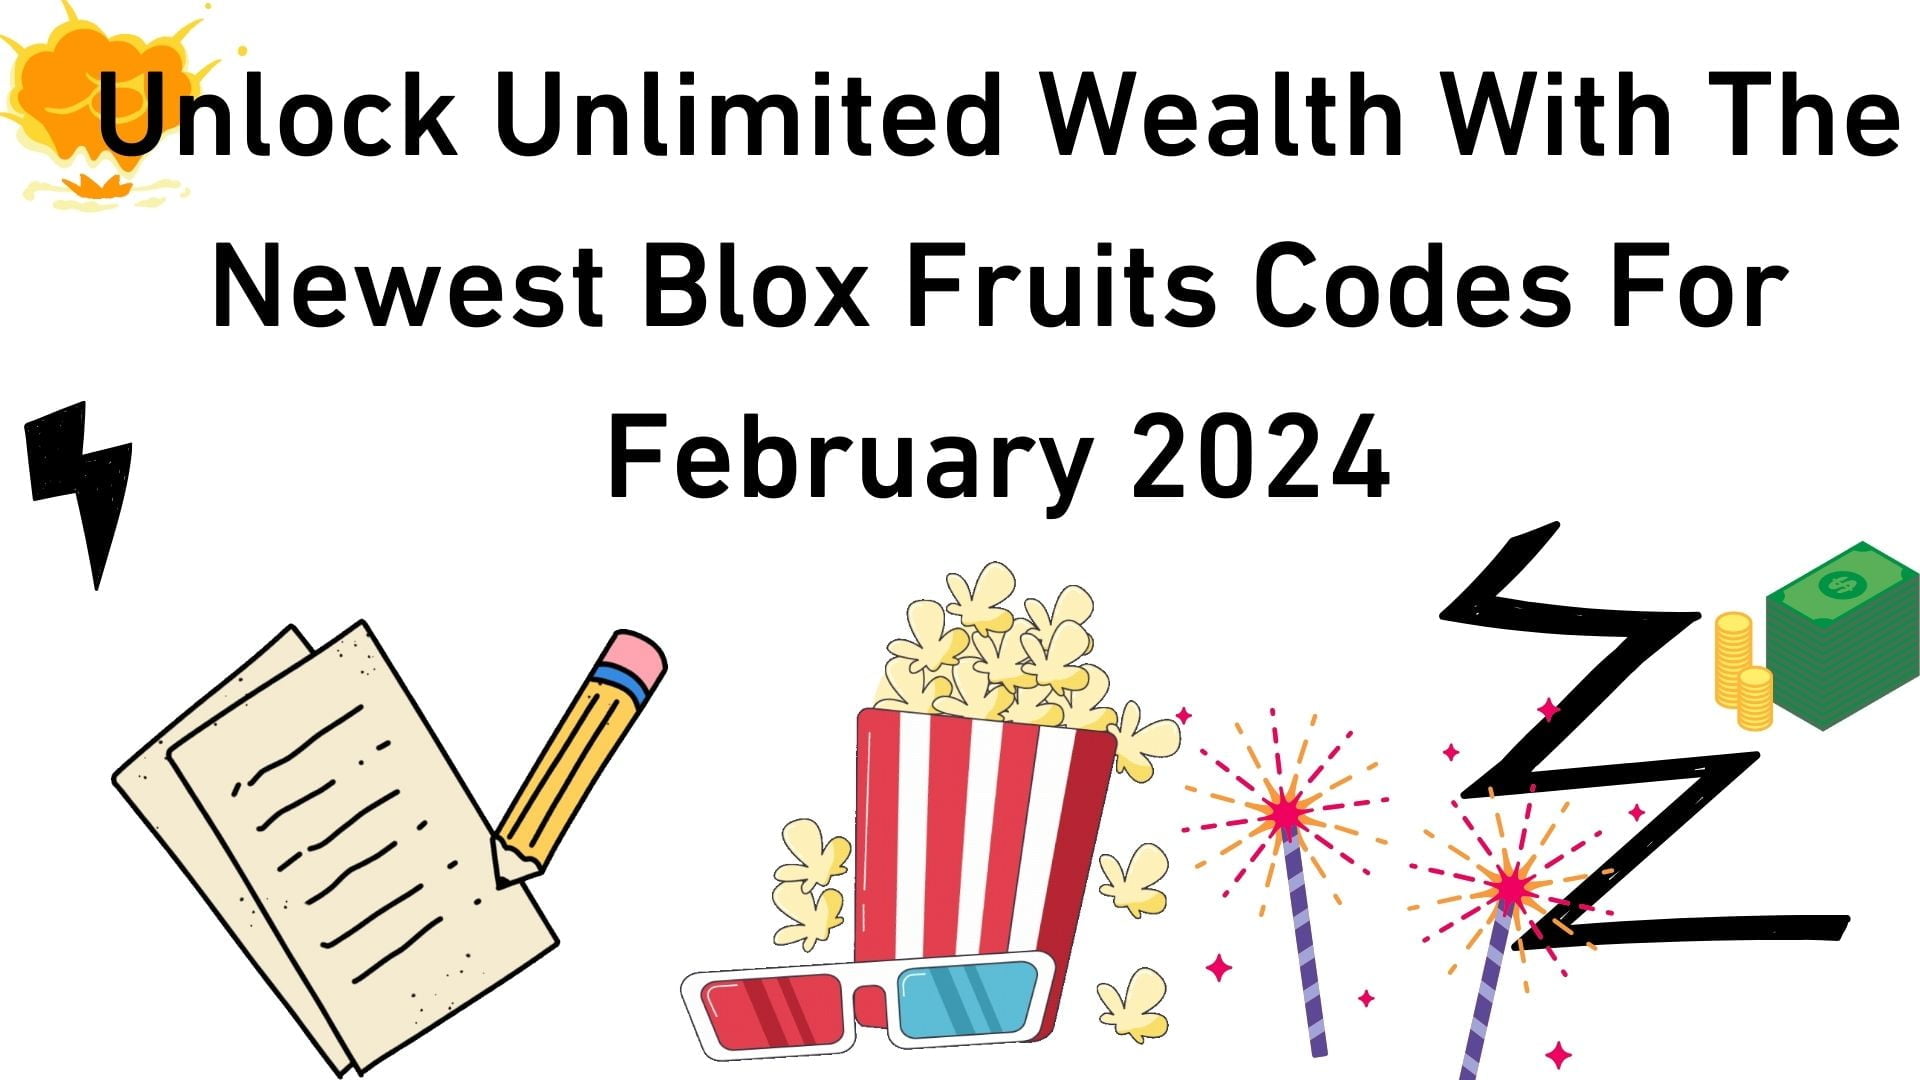 Unlock Unlimited Wealth With The Newest Blox Fruits Codes For February 2024